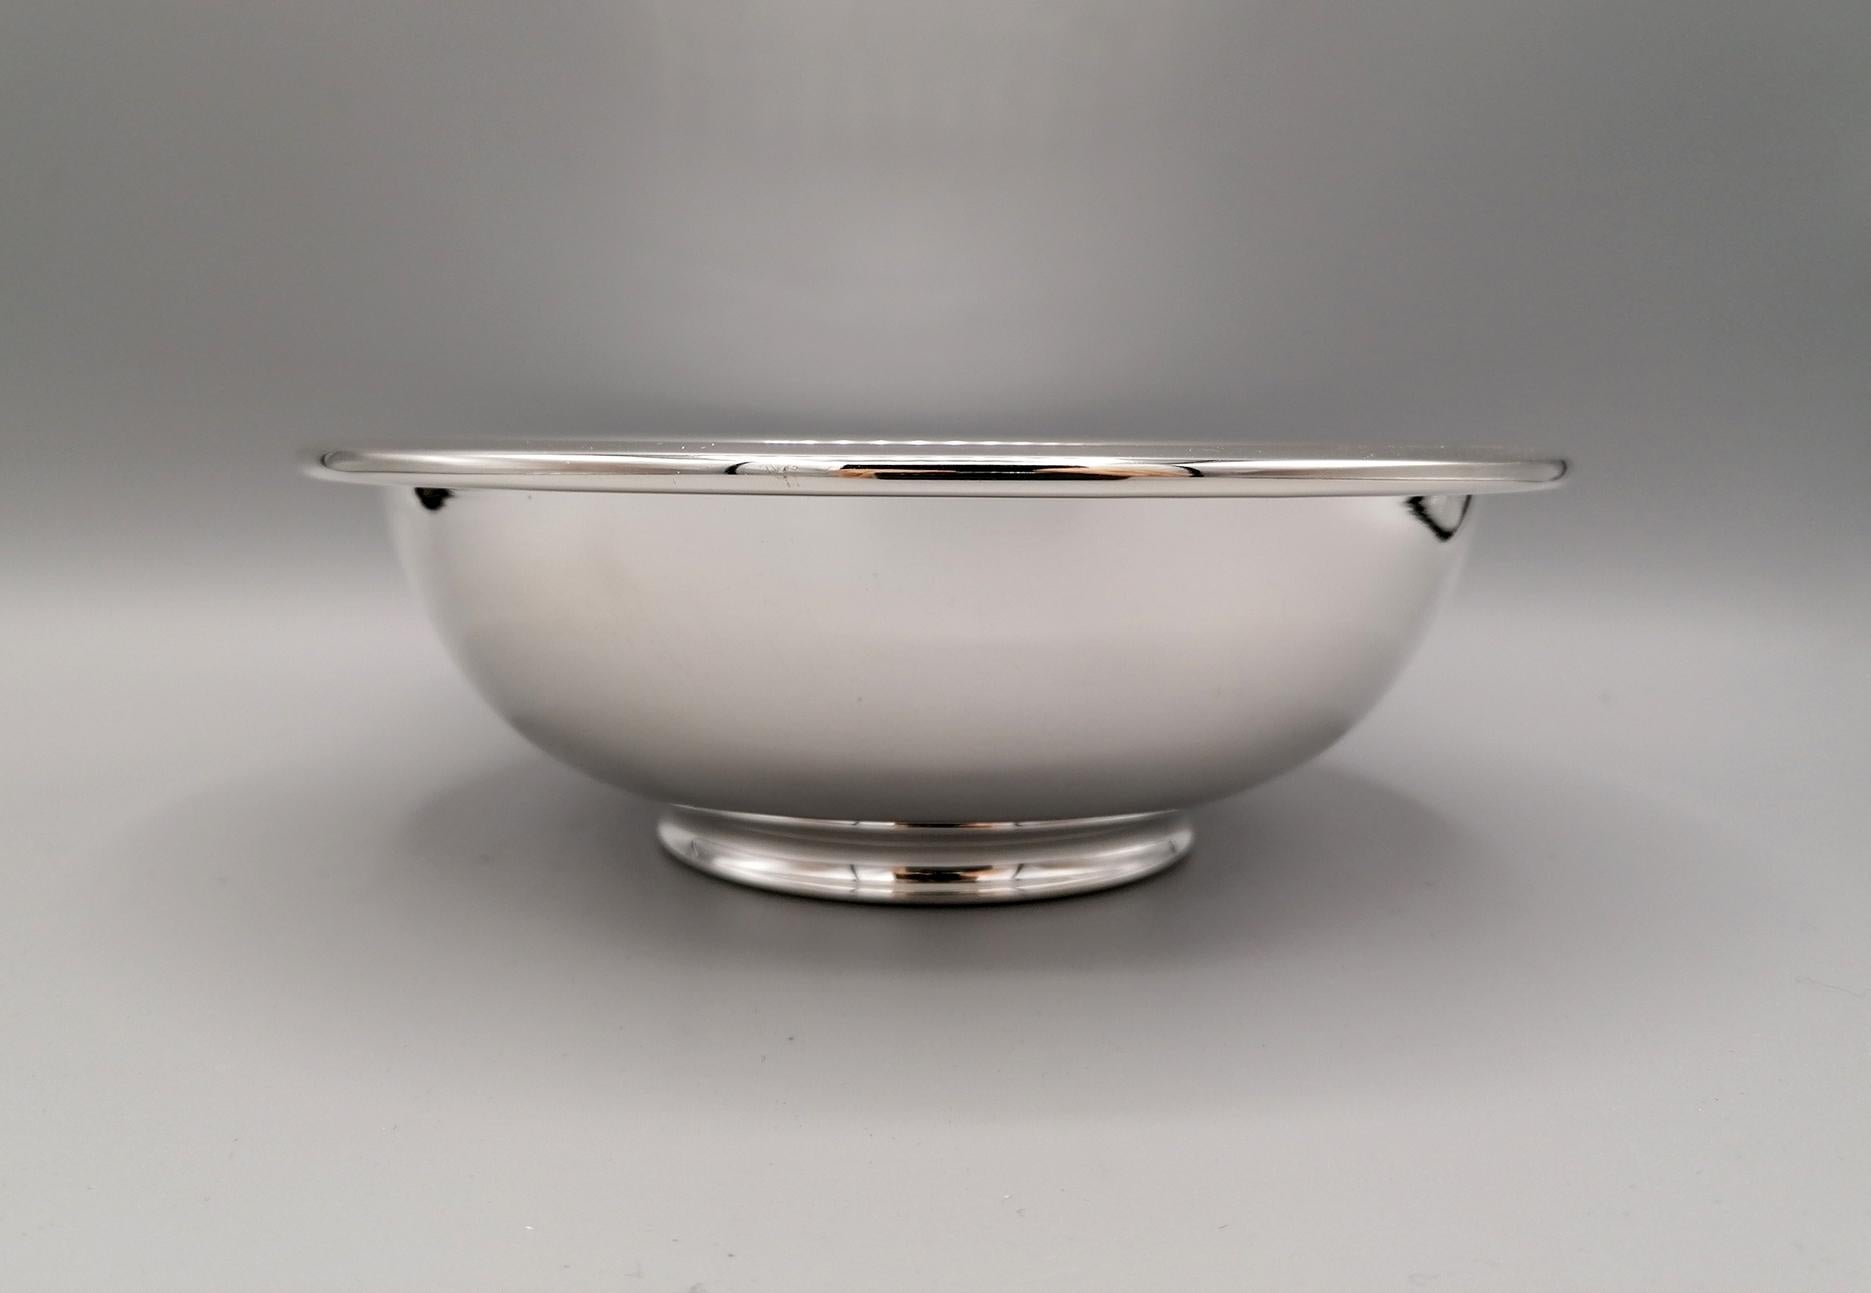 Neoclassical Revival 20th Century Made in Italy Silver Bowl